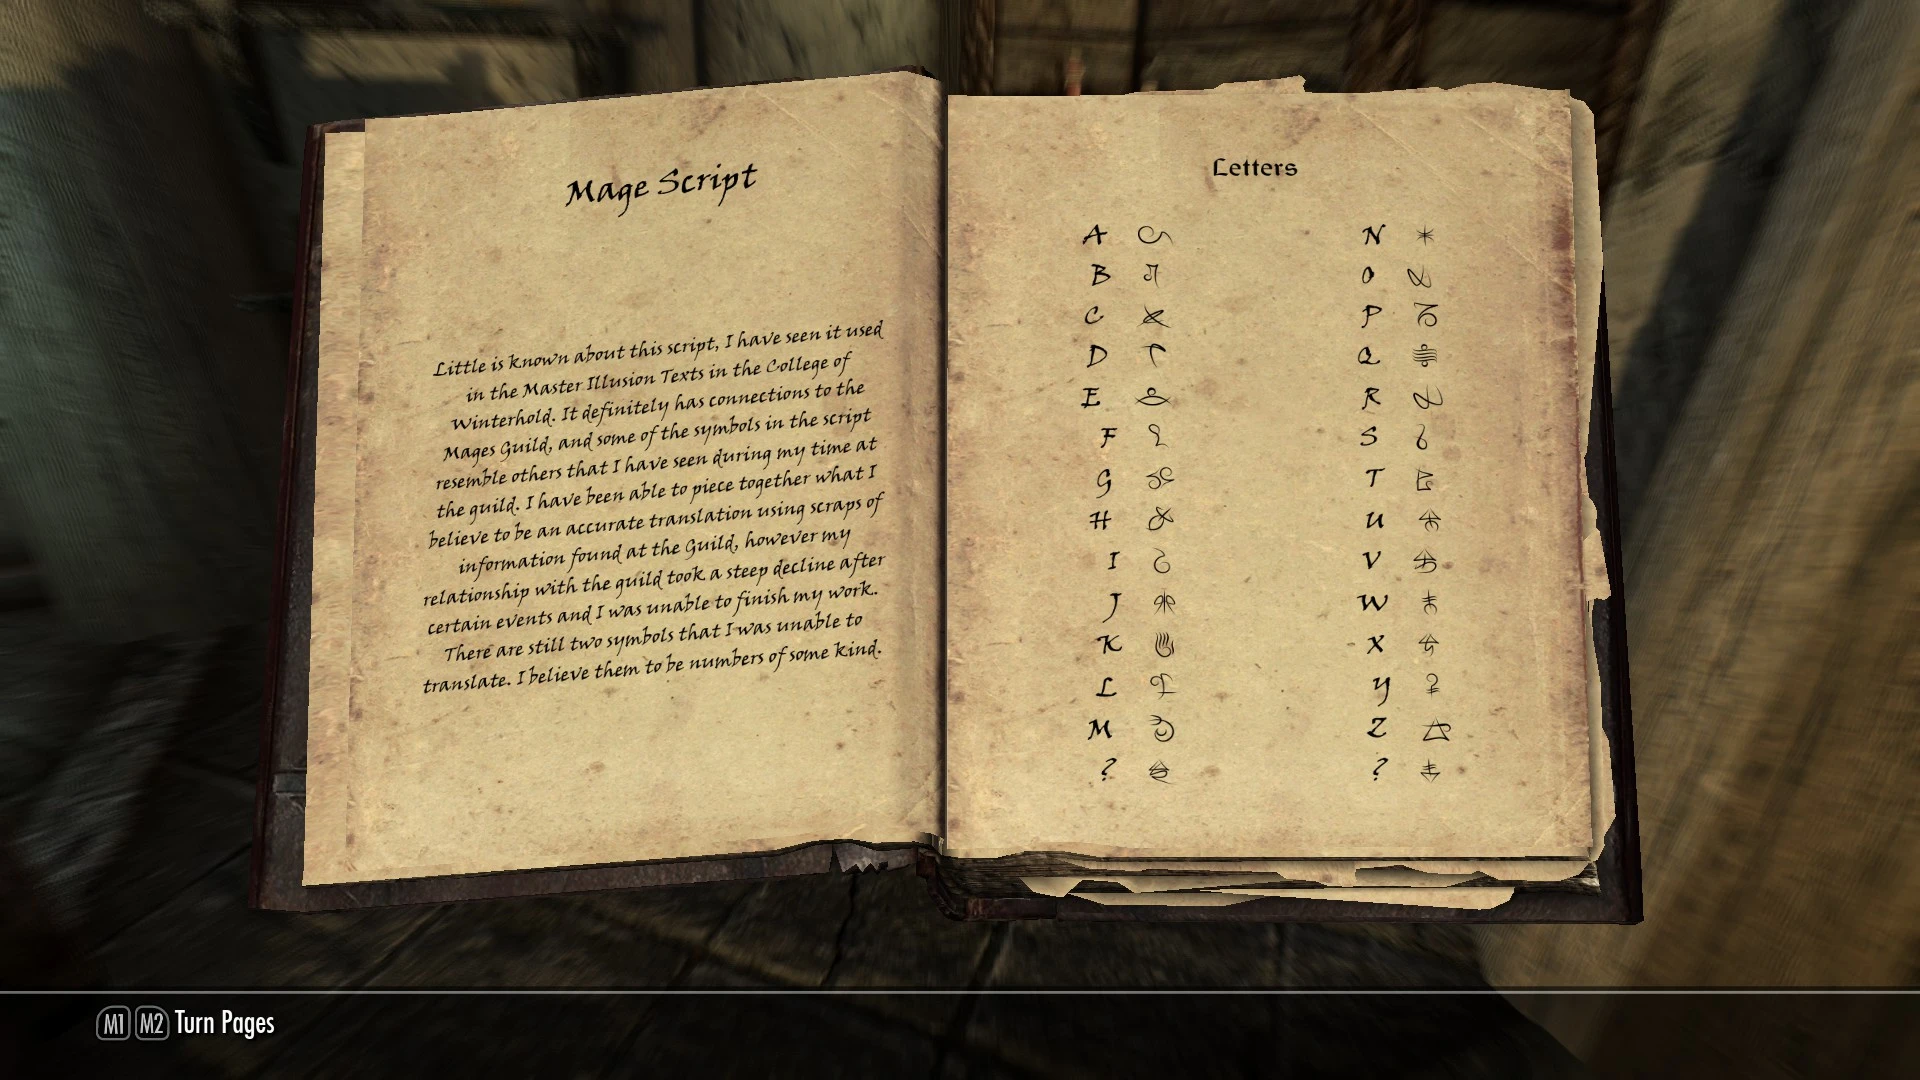 how to change language in skyrim from russian to english